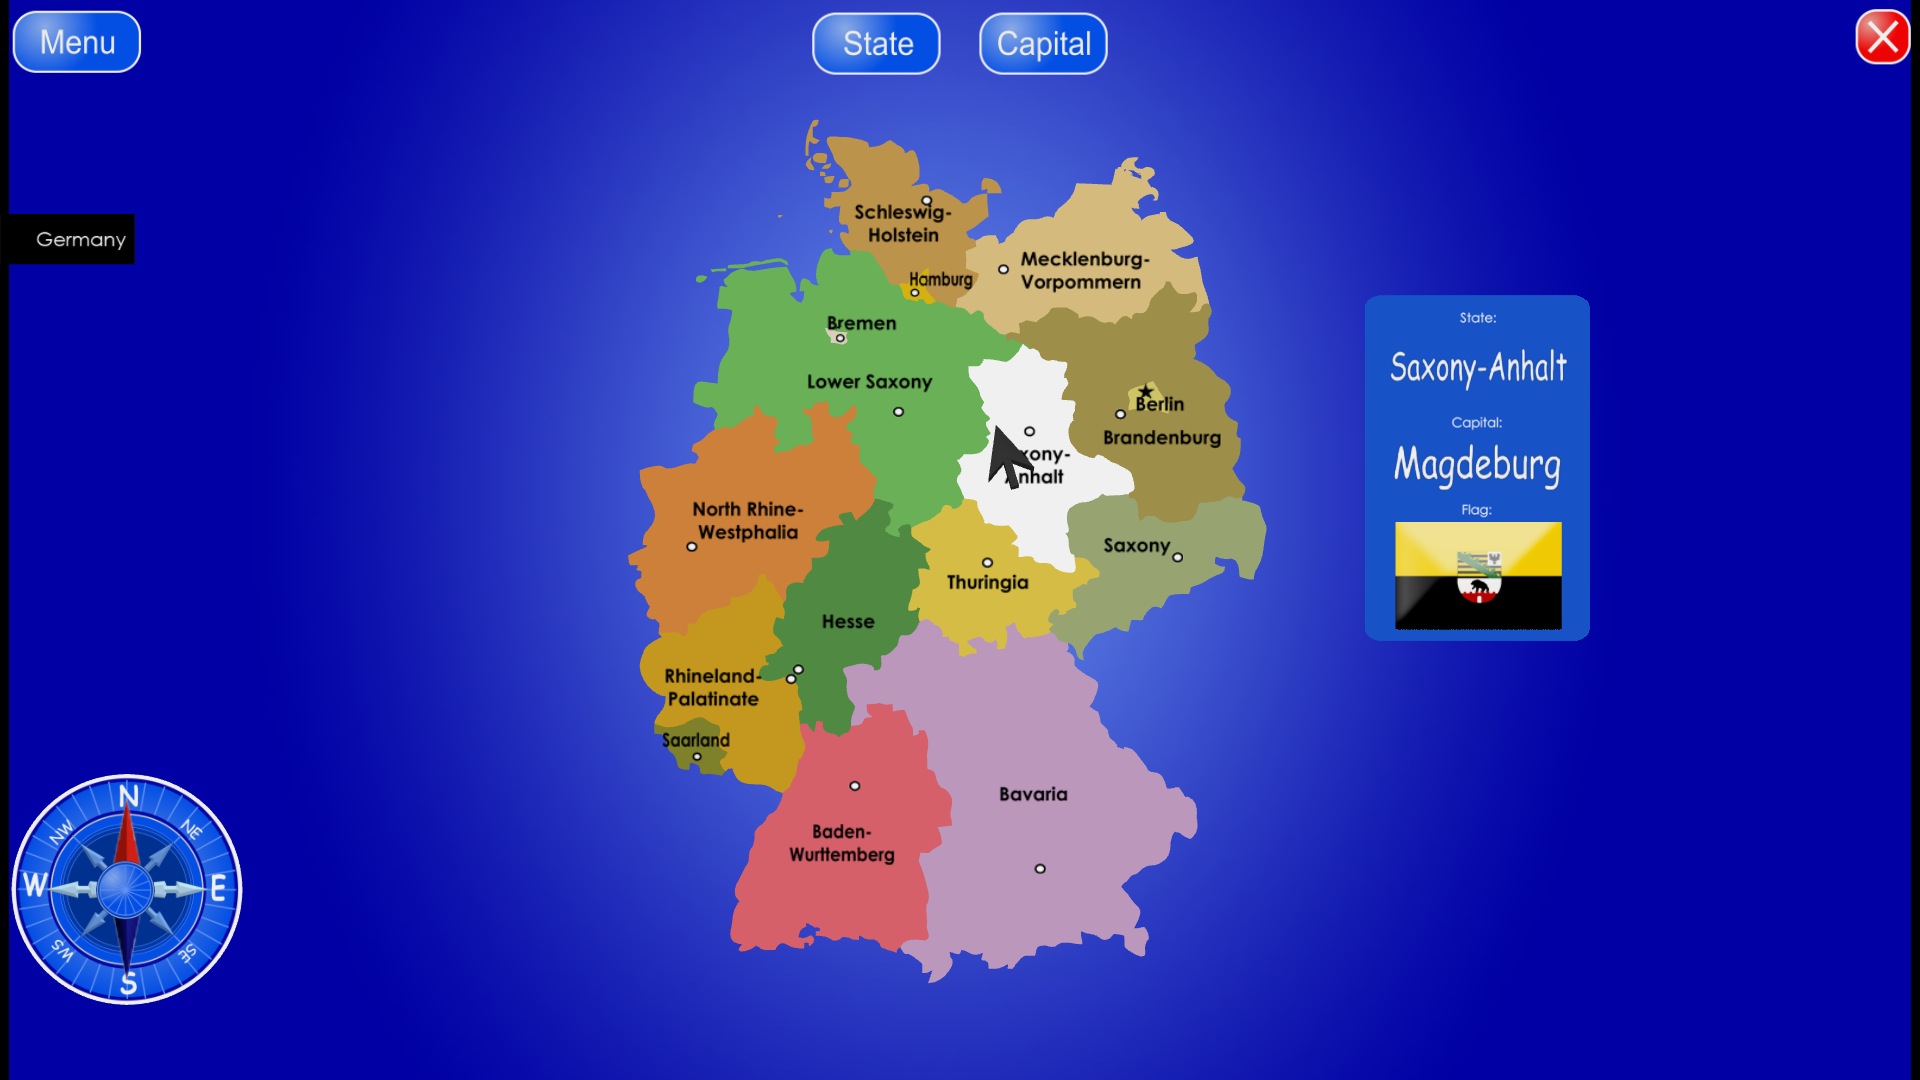 States of Germany 1.1 : General view